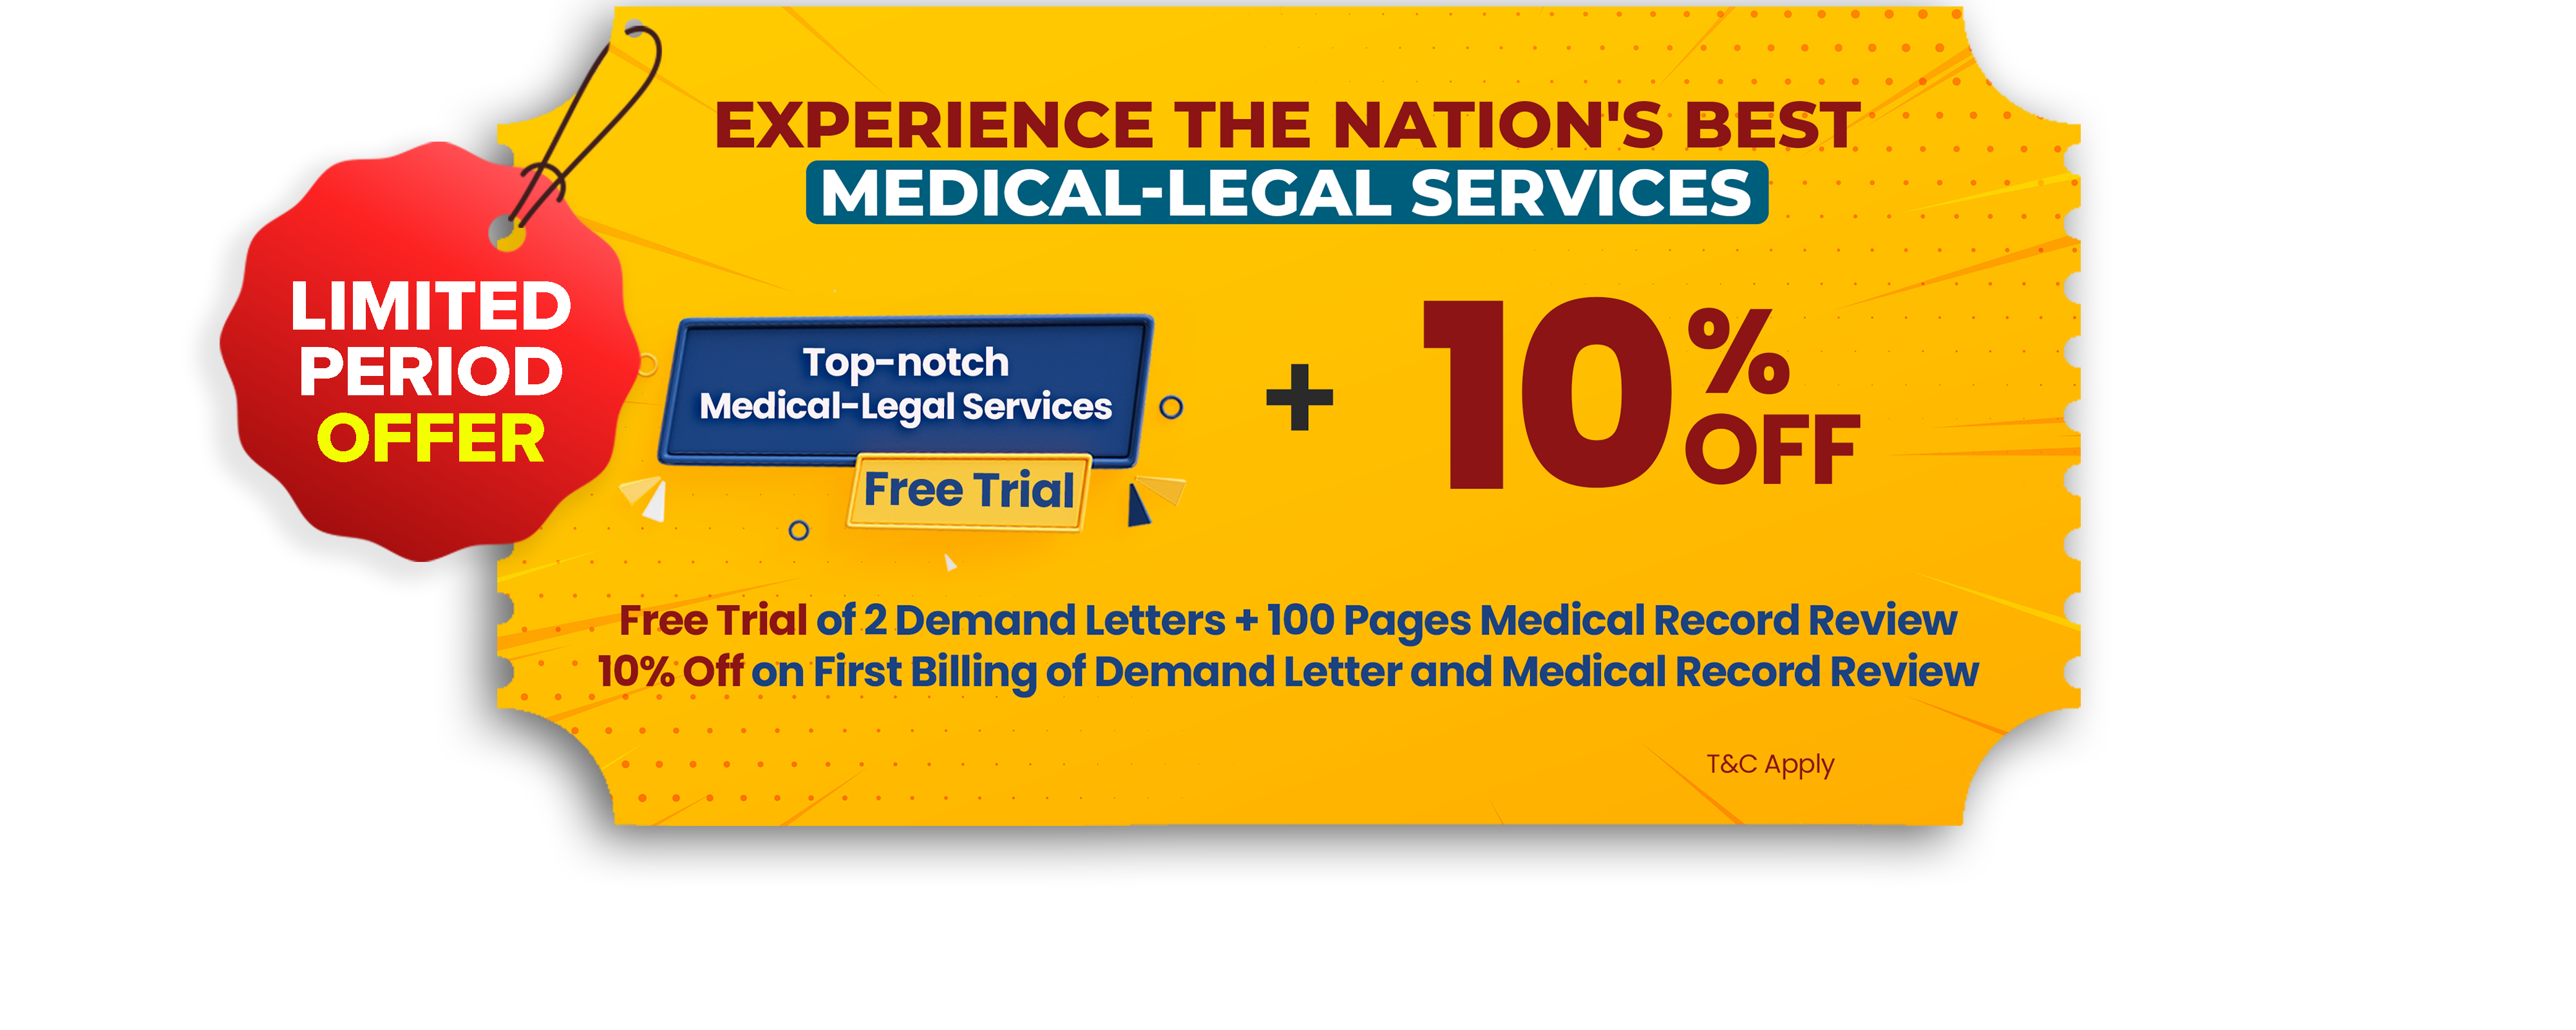 Medical Record Review and Demand Letter Offer